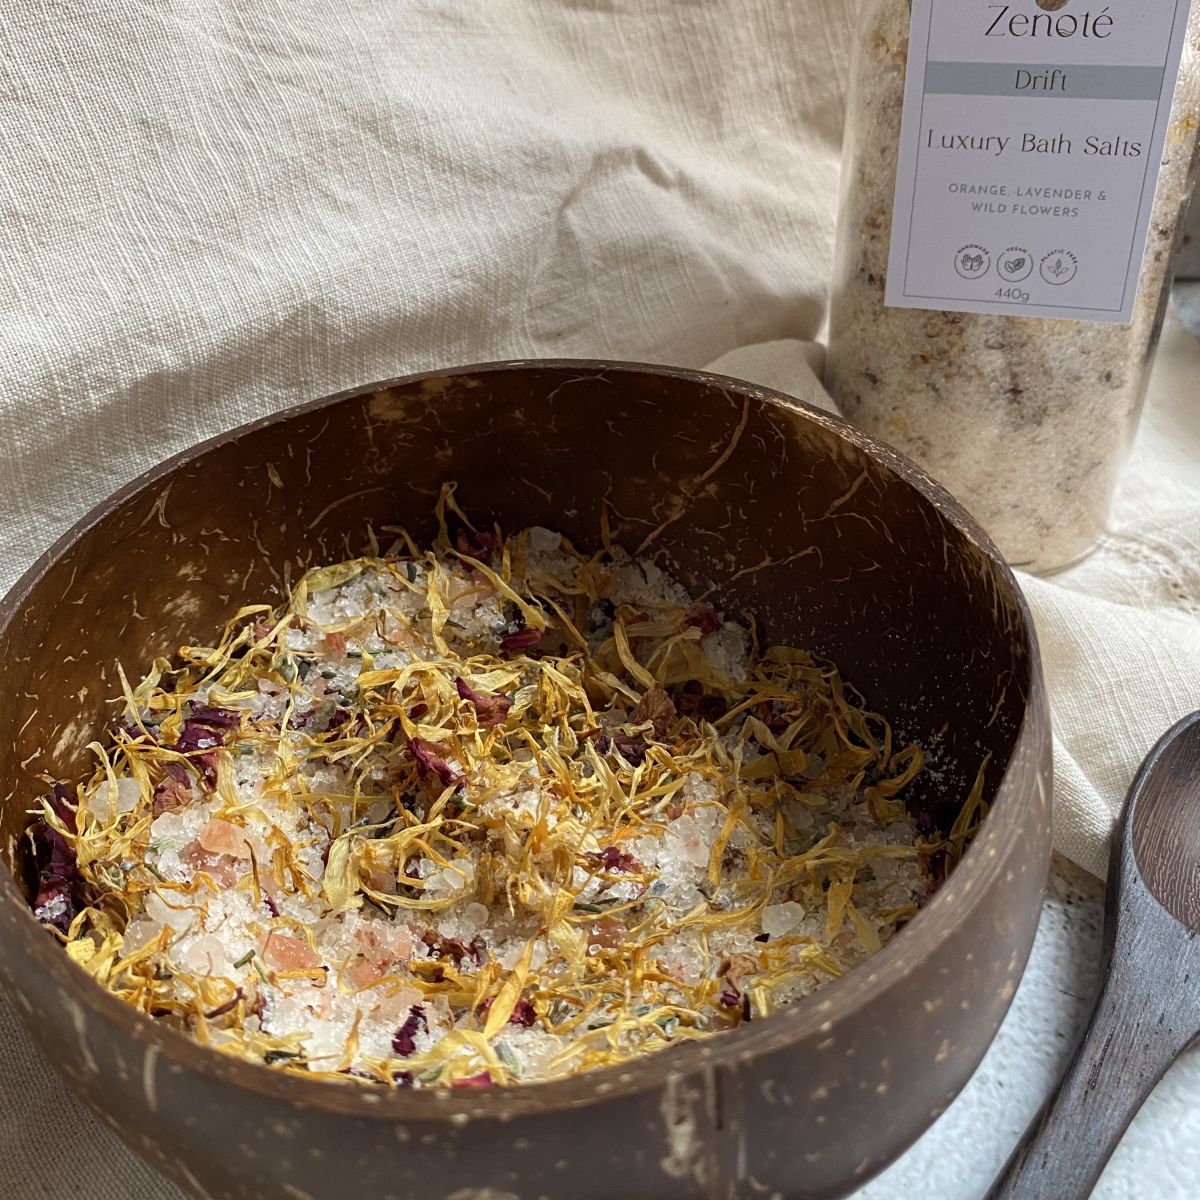 Botanical Salts With Wild Rose & Lavender Petals In A Coconut Bowl